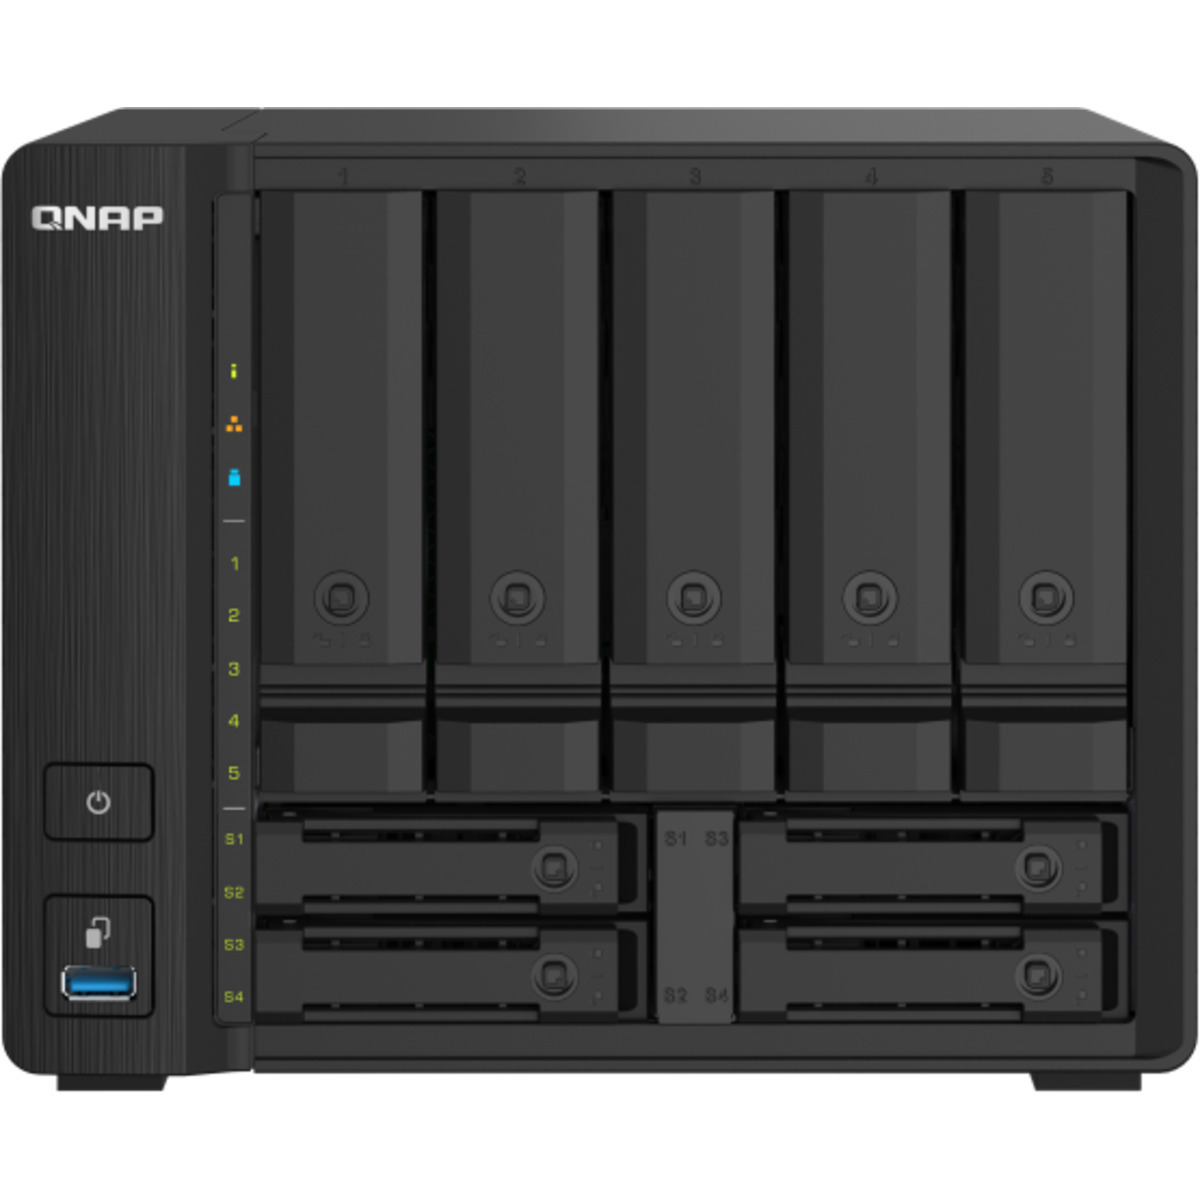 QNAP TS-932PX 5tb 5+4-Bay Desktop Multimedia / Power User / Business NAS - Network Attached Storage Device 5x1tb Sandisk Ultra 3D SDSSDH3-1T00 2.5 560/520MB/s SATA 6Gb/s SSD CONSUMER Class Drives Installed - Burn-In Tested - FREE RAM UPGRADE TS-932PX